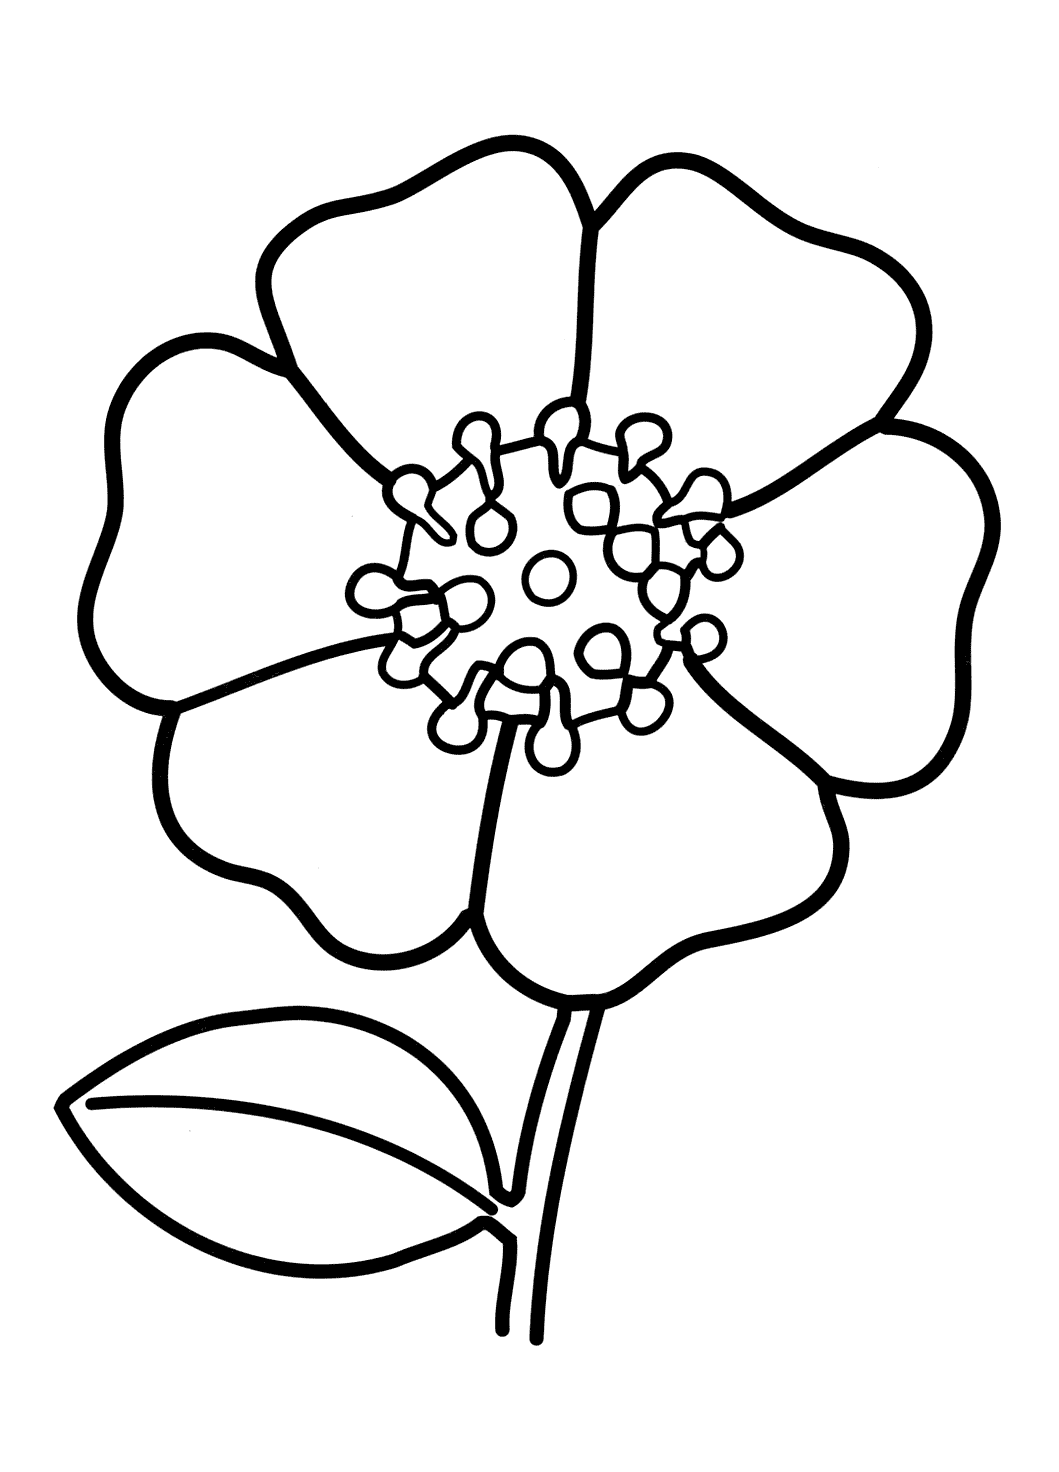 Coloring page - Flower